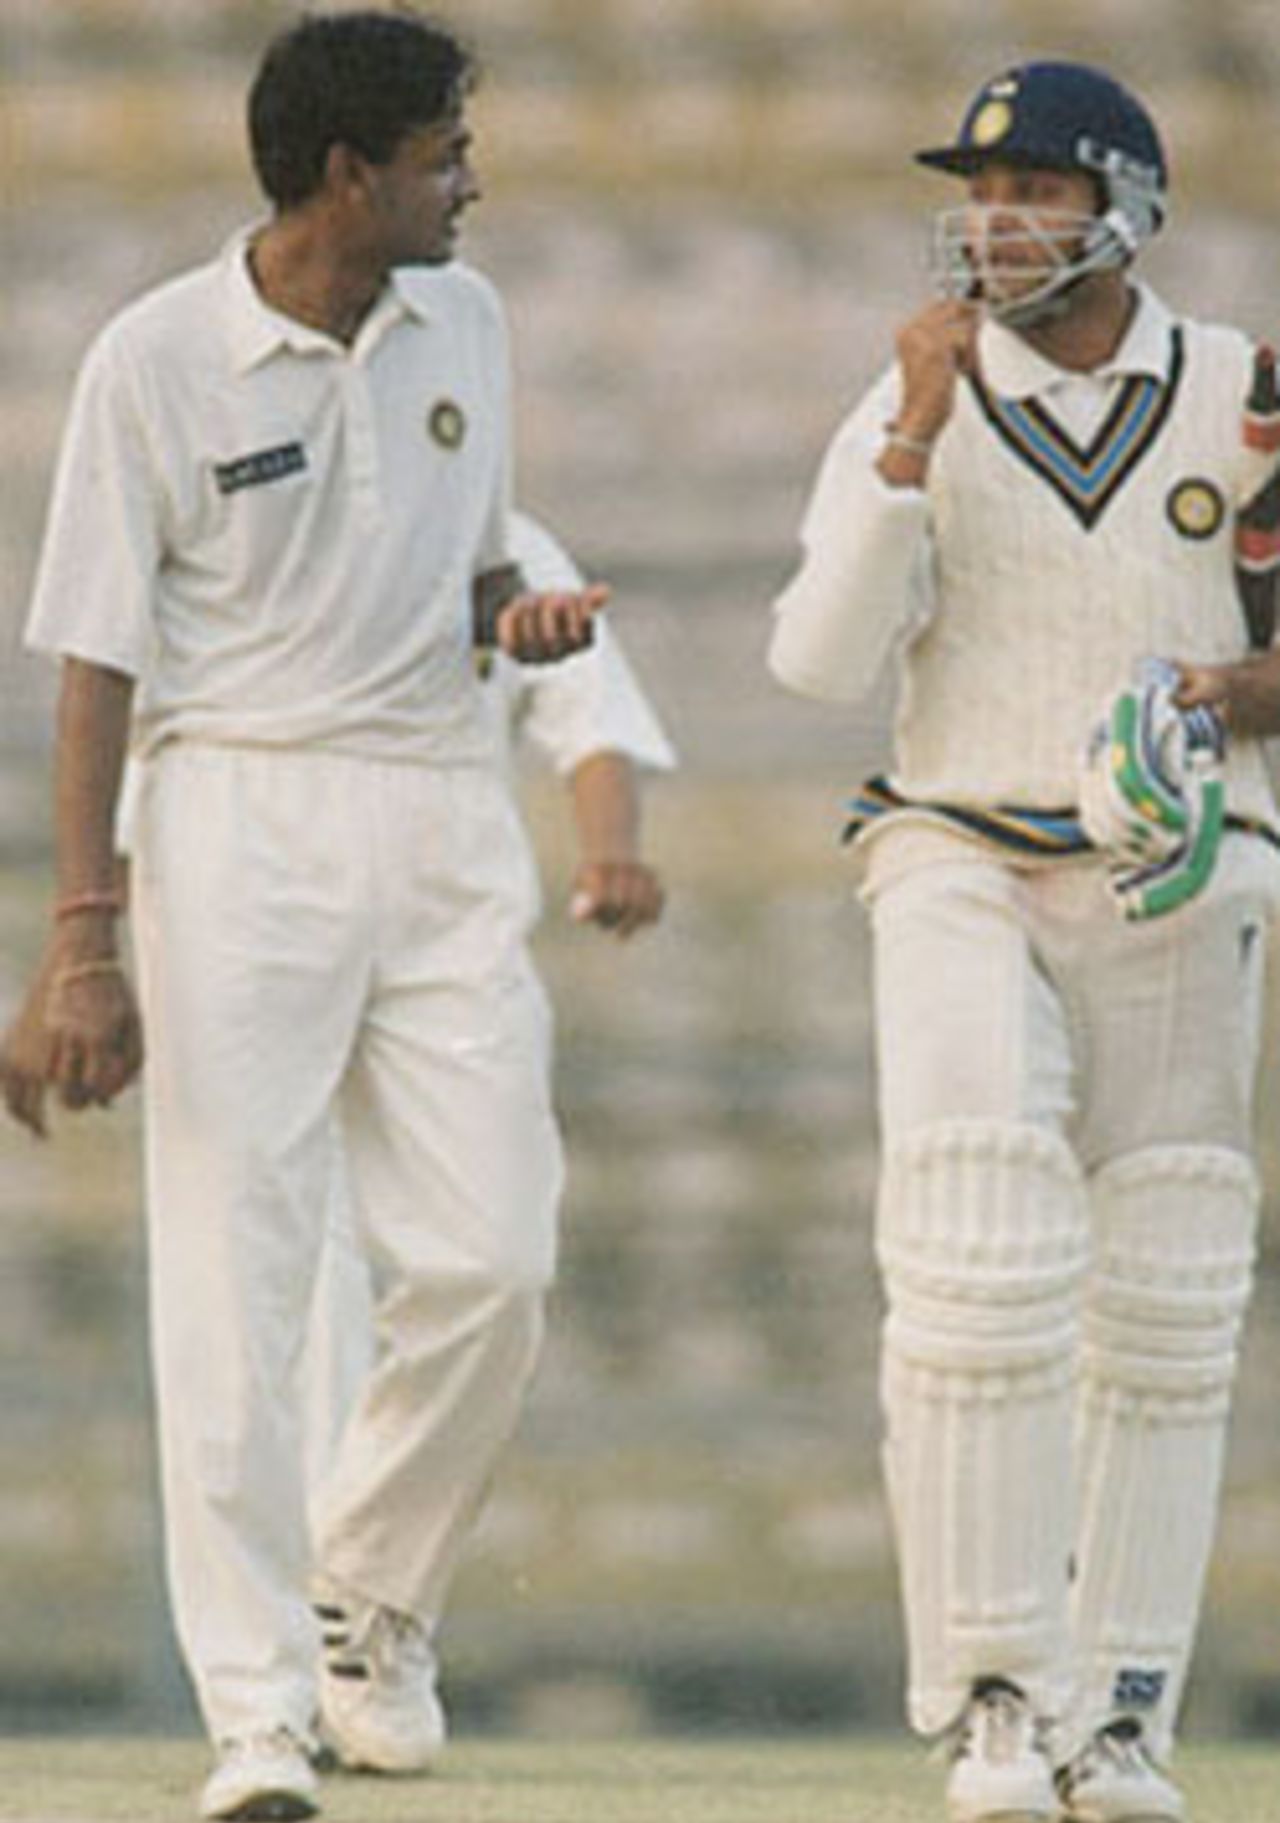 Mohanty has a chat with the batsman on his way to the bowling mark. Ranji Trophy East Zone League, 2000-01, Bengal v Orissa, Eden Gardens, Calcutta, 28-31 December 2000 (Day 3).